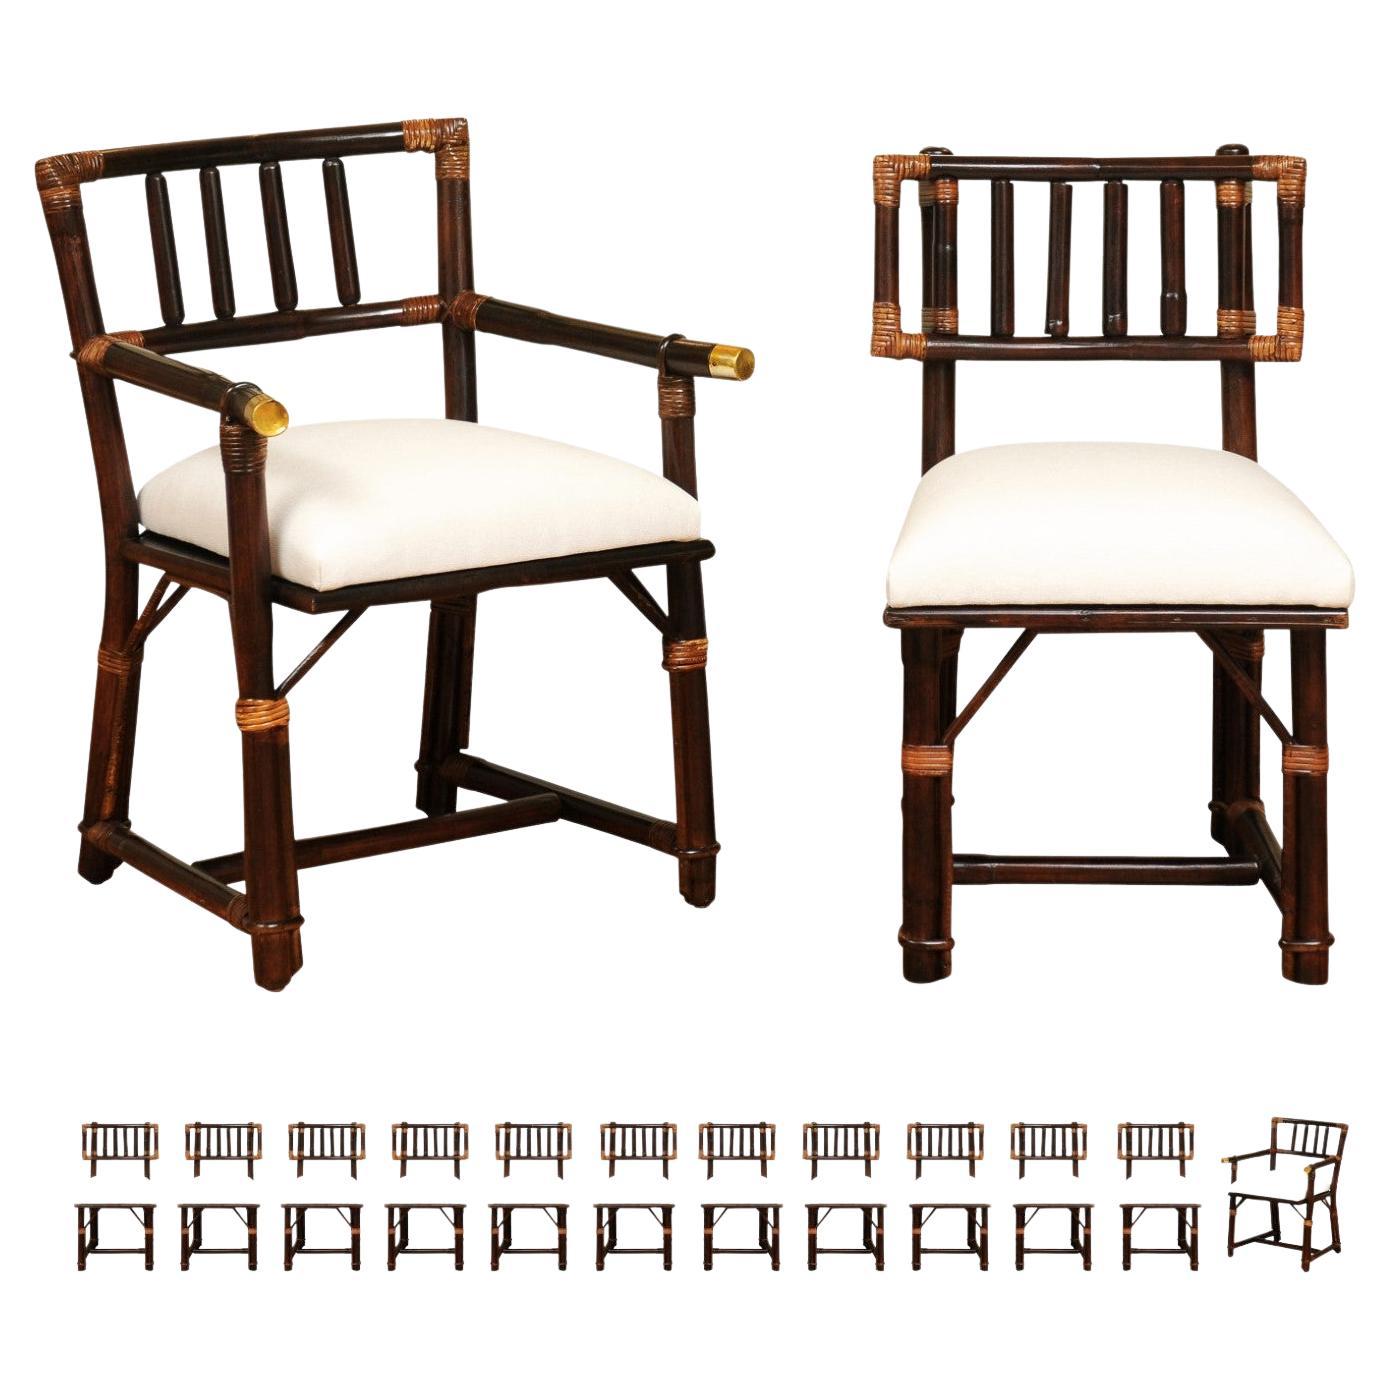 Radiant Set of 14 Rattan Chairs in Cordovan and Caramel by Wisner for Ficks Reed For Sale